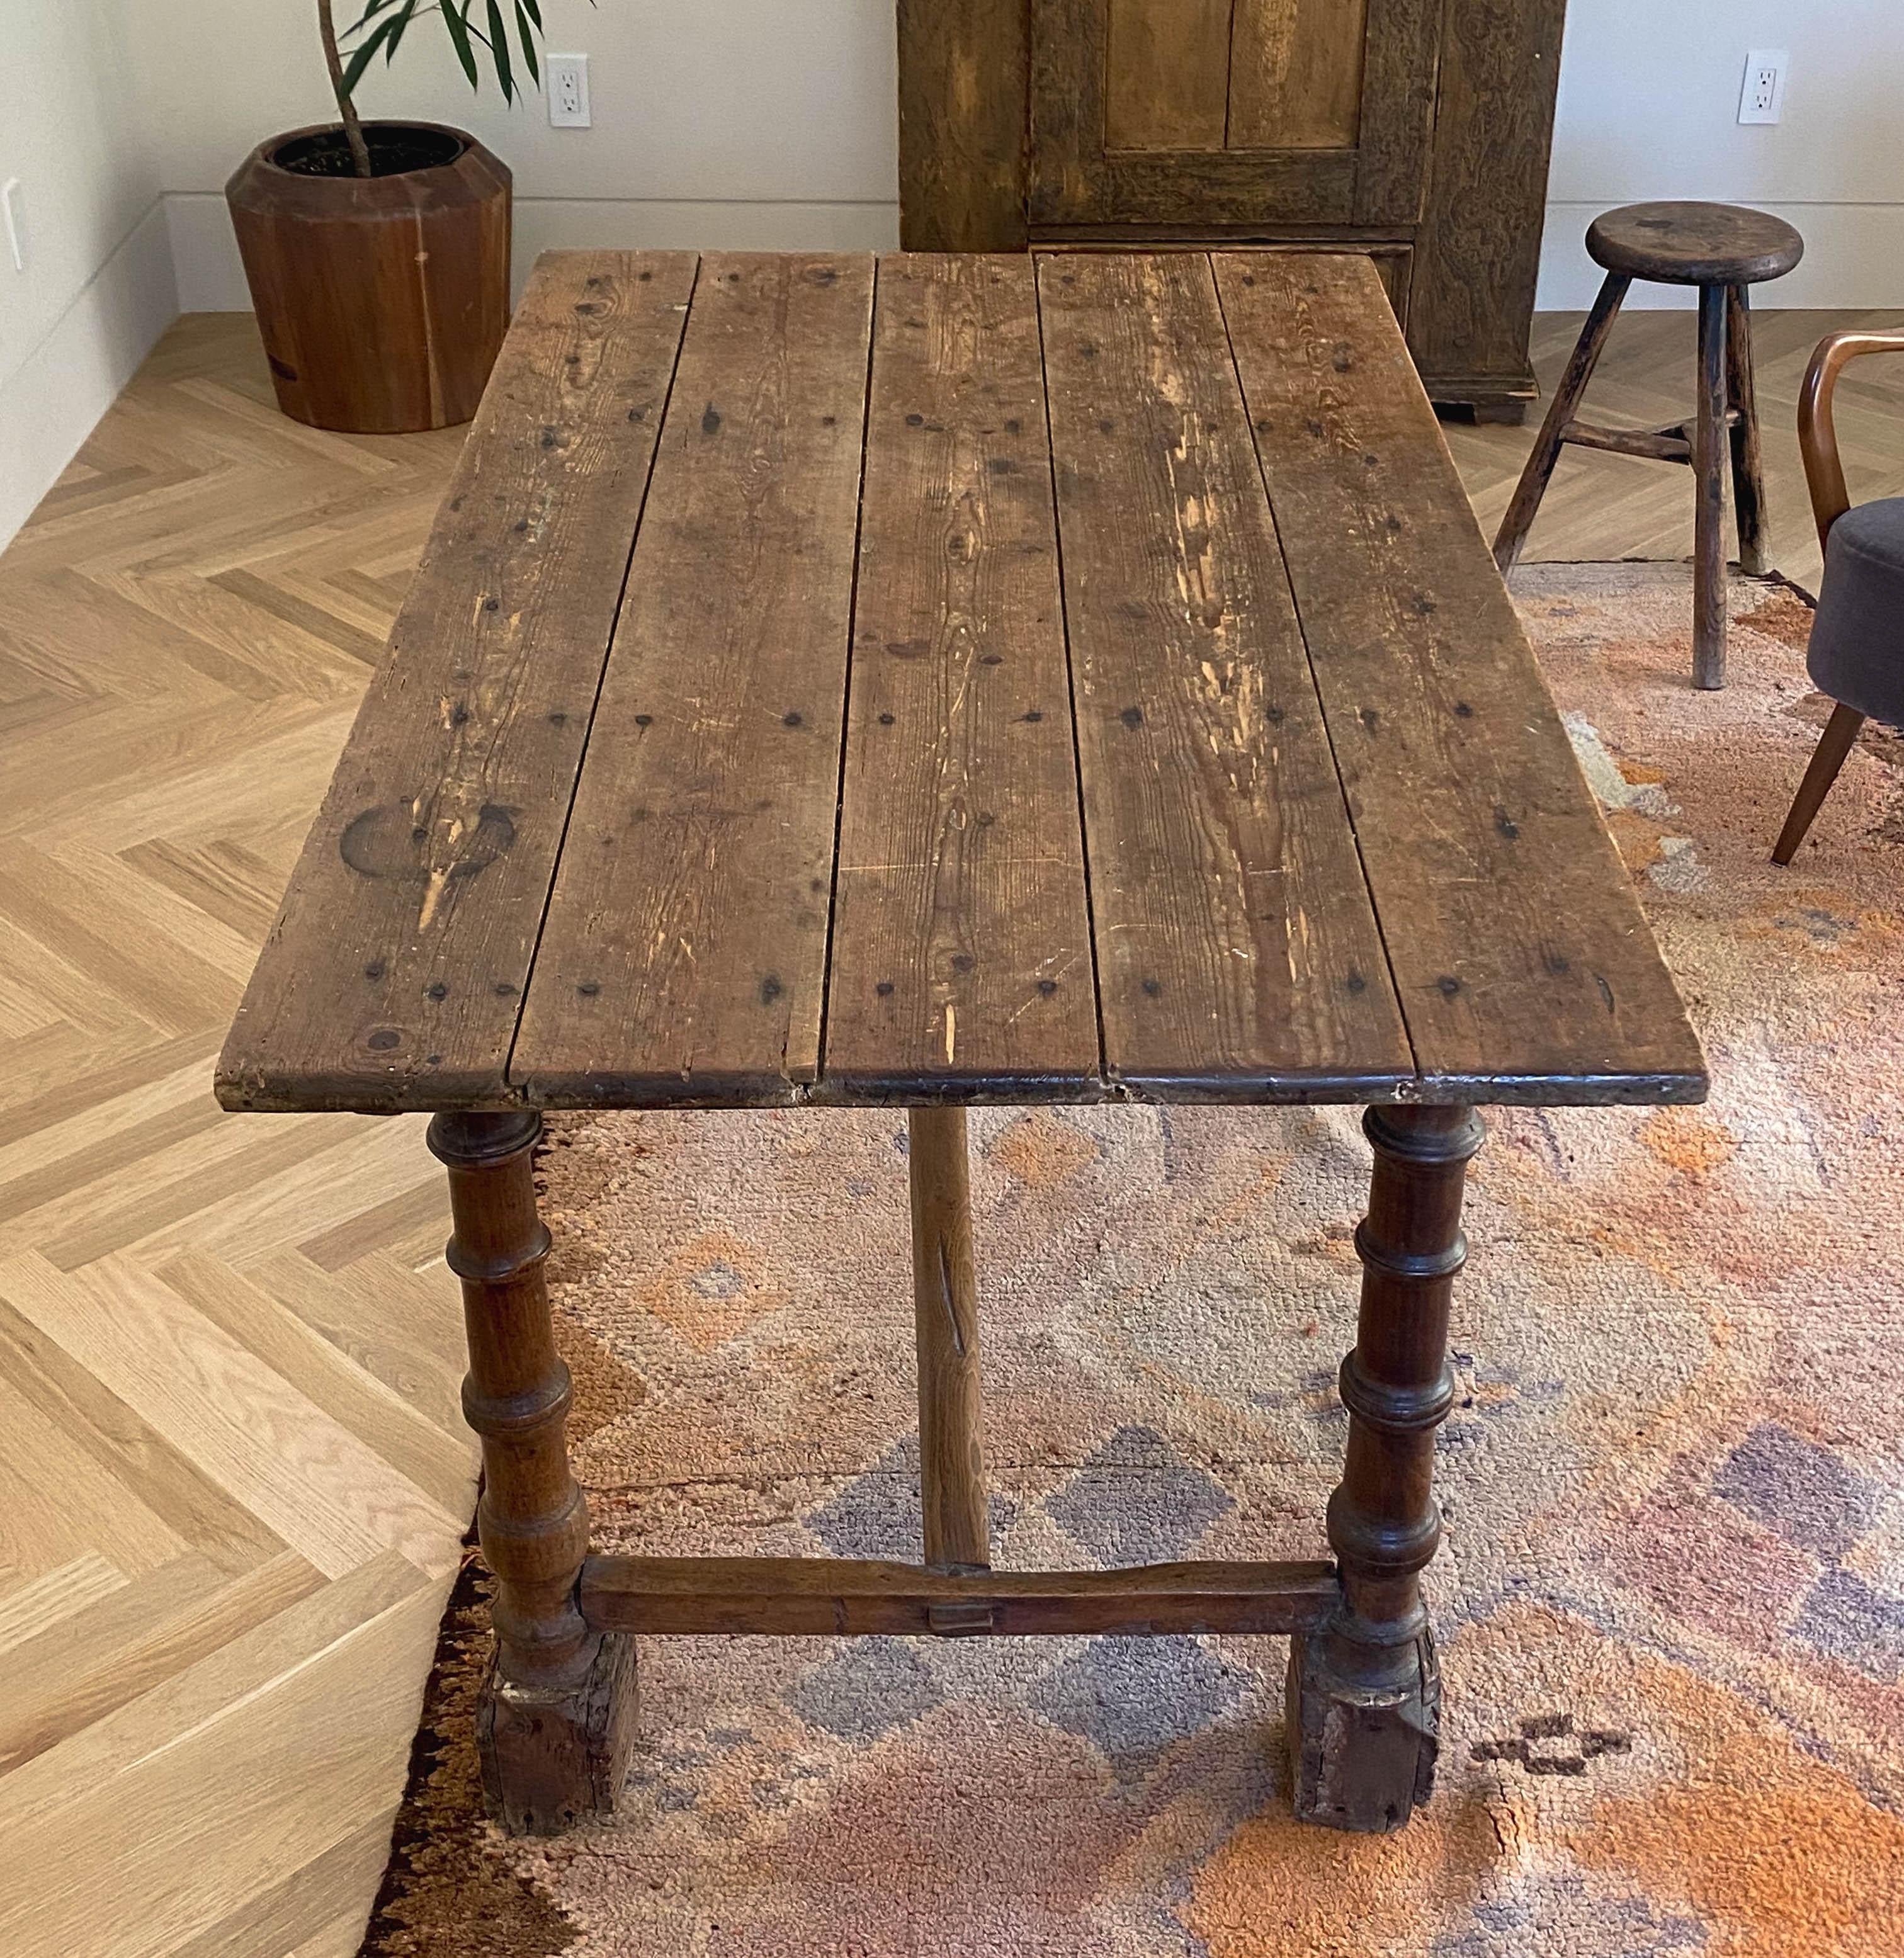 Hand-Carved Rustic 19th Century Pine Table with Robust Leg Detailing For Sale